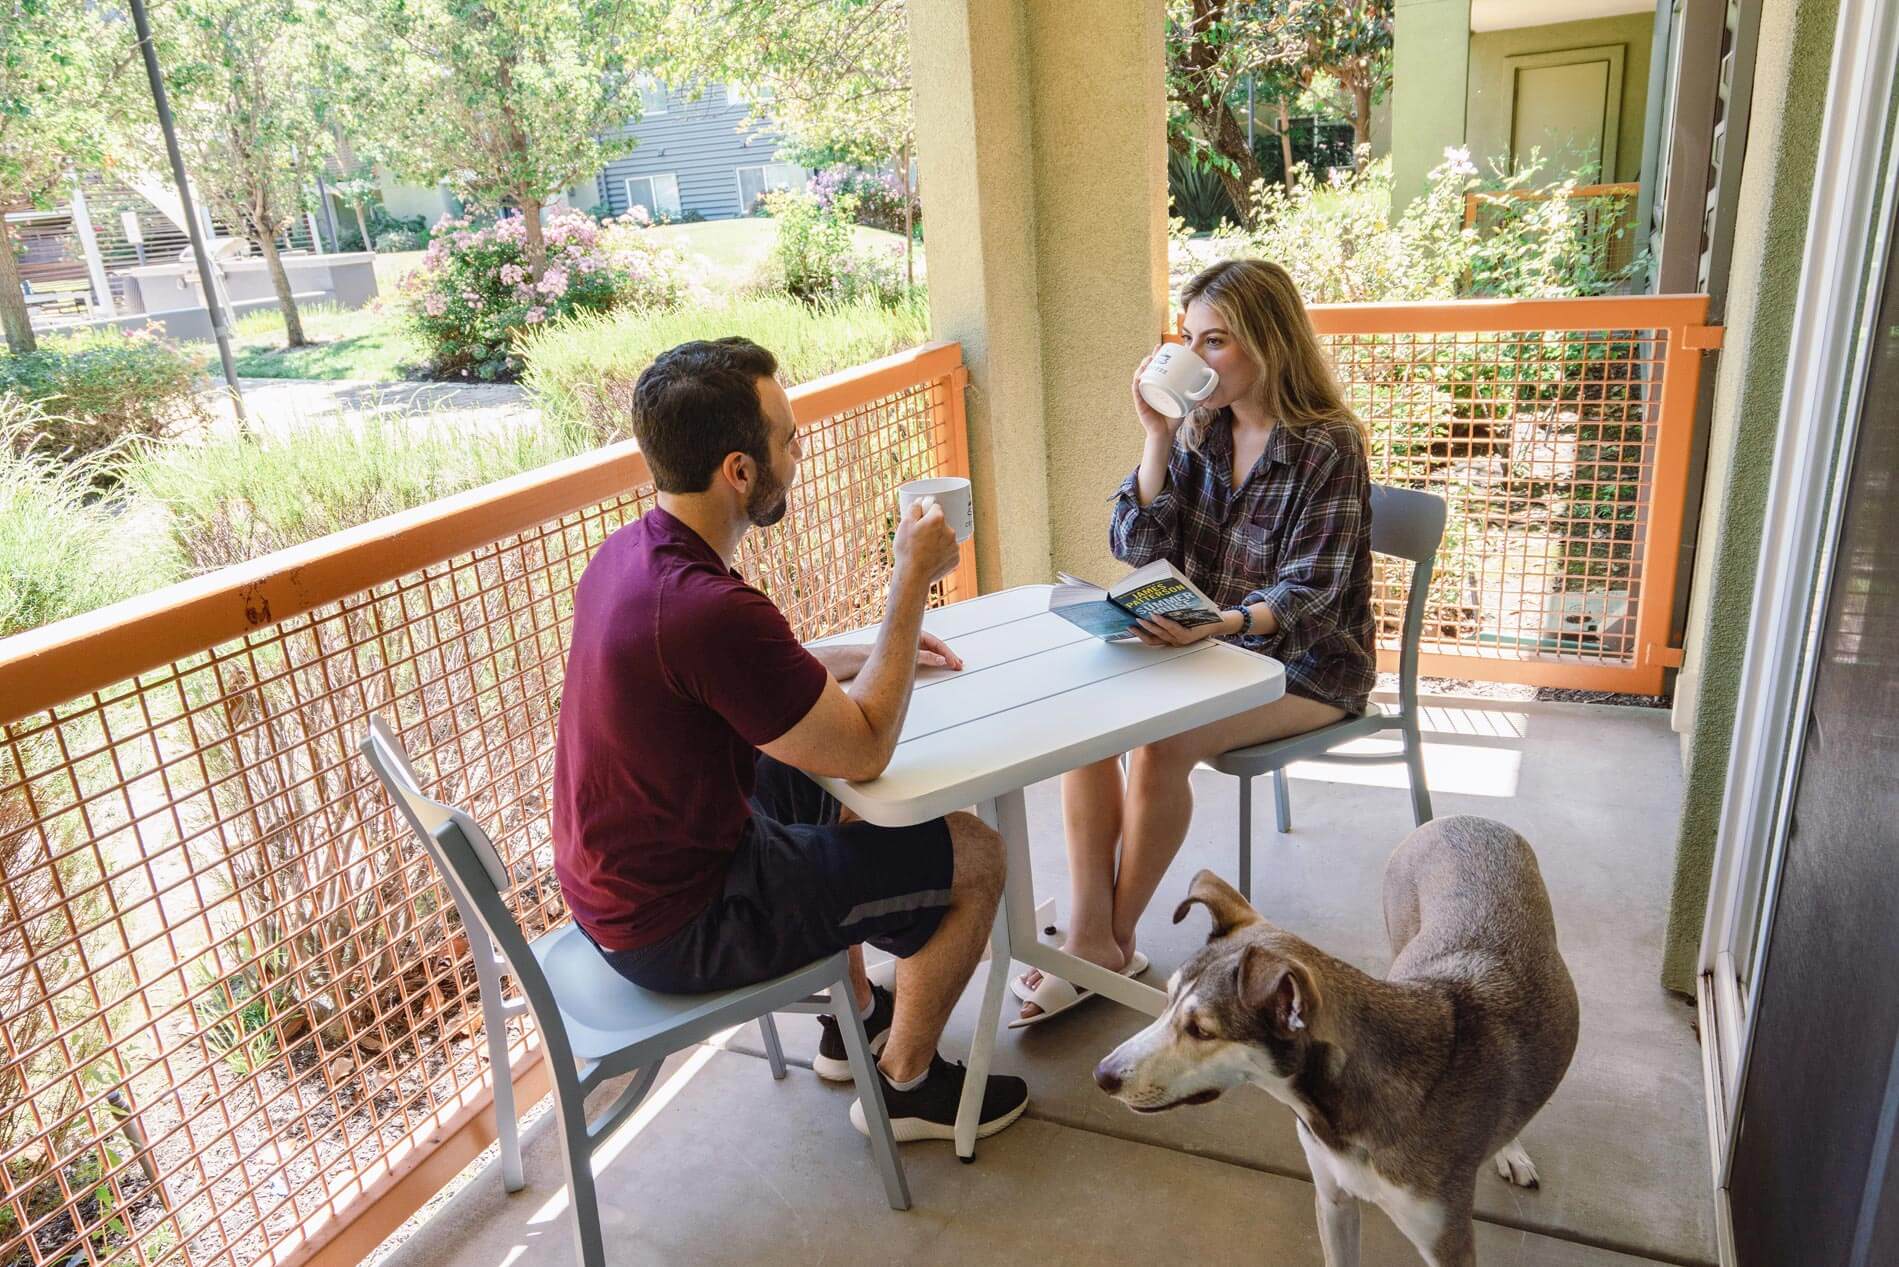 CitySouth woman, man, and dog sit at table on apartment patio